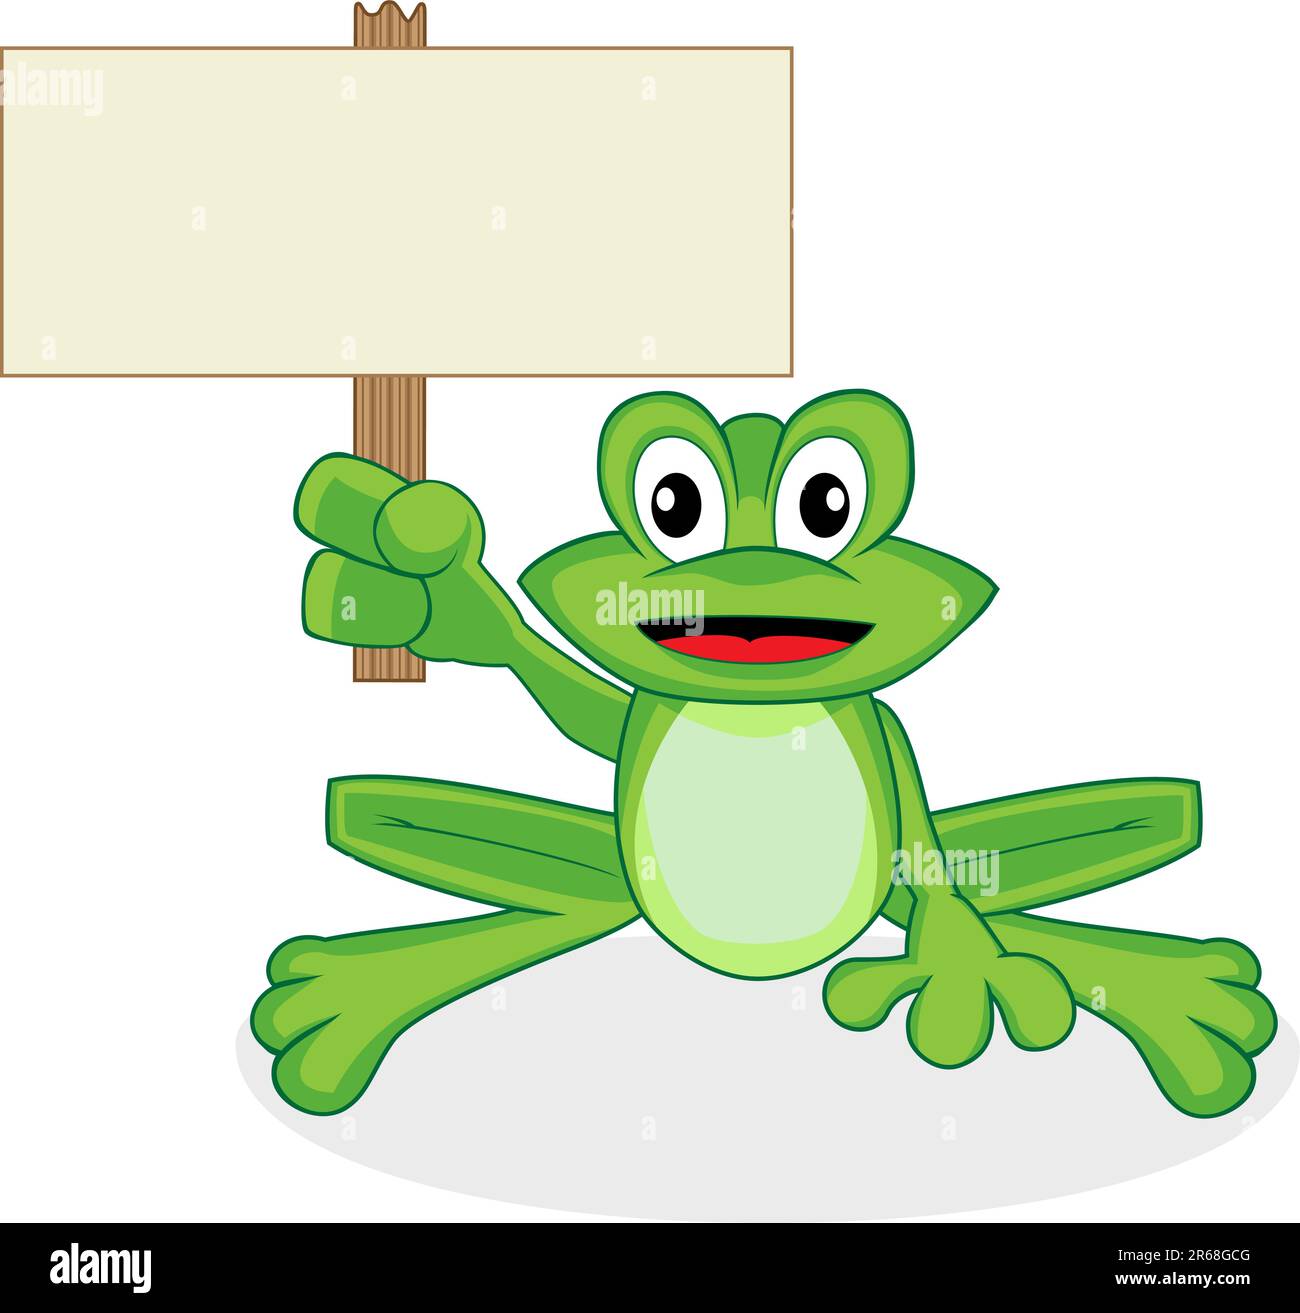 Vector illustration of a cute happy looking tiny green frog with big eyes. No gradient. Place your text in the empty sign. Stock Vector